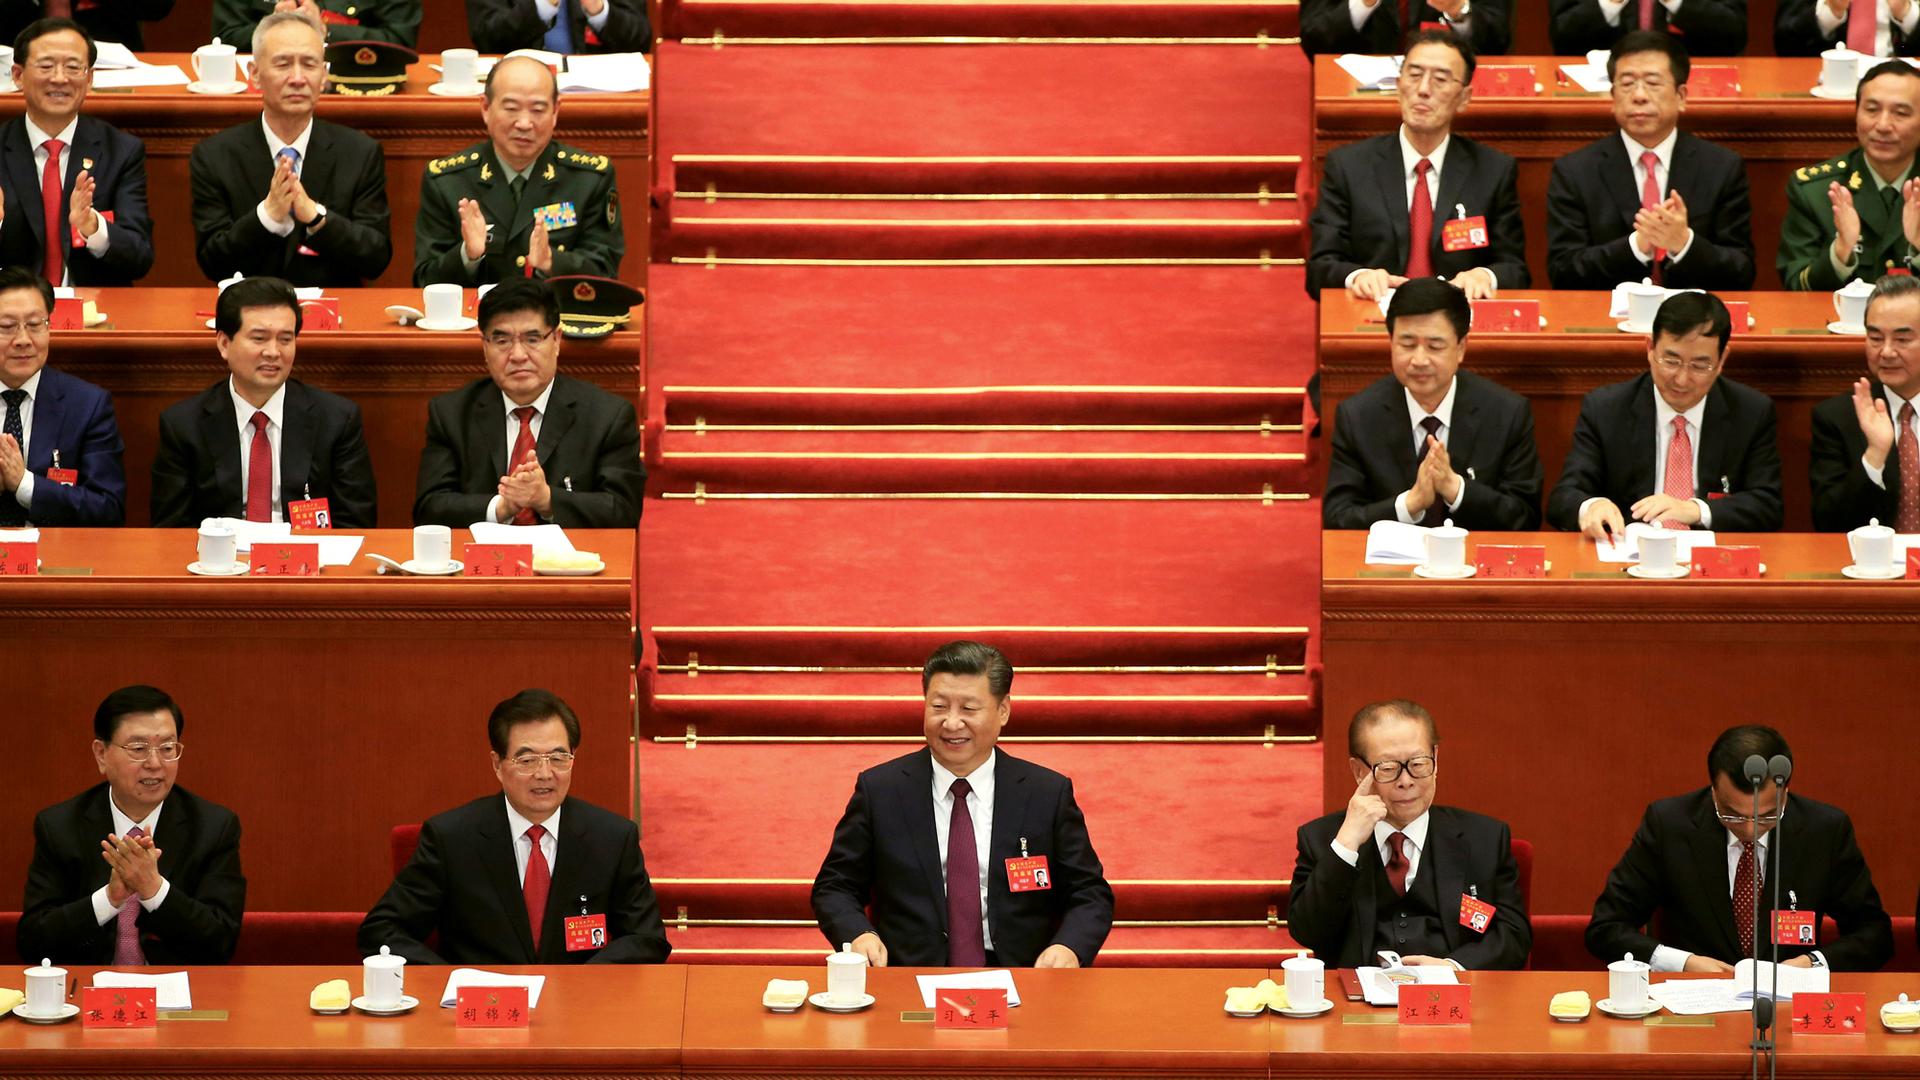 Chinese President Xi Jinping (center) at the opening of the 19th National Congress of the Communist Party of China at the Great Hall of the People in Beijing.